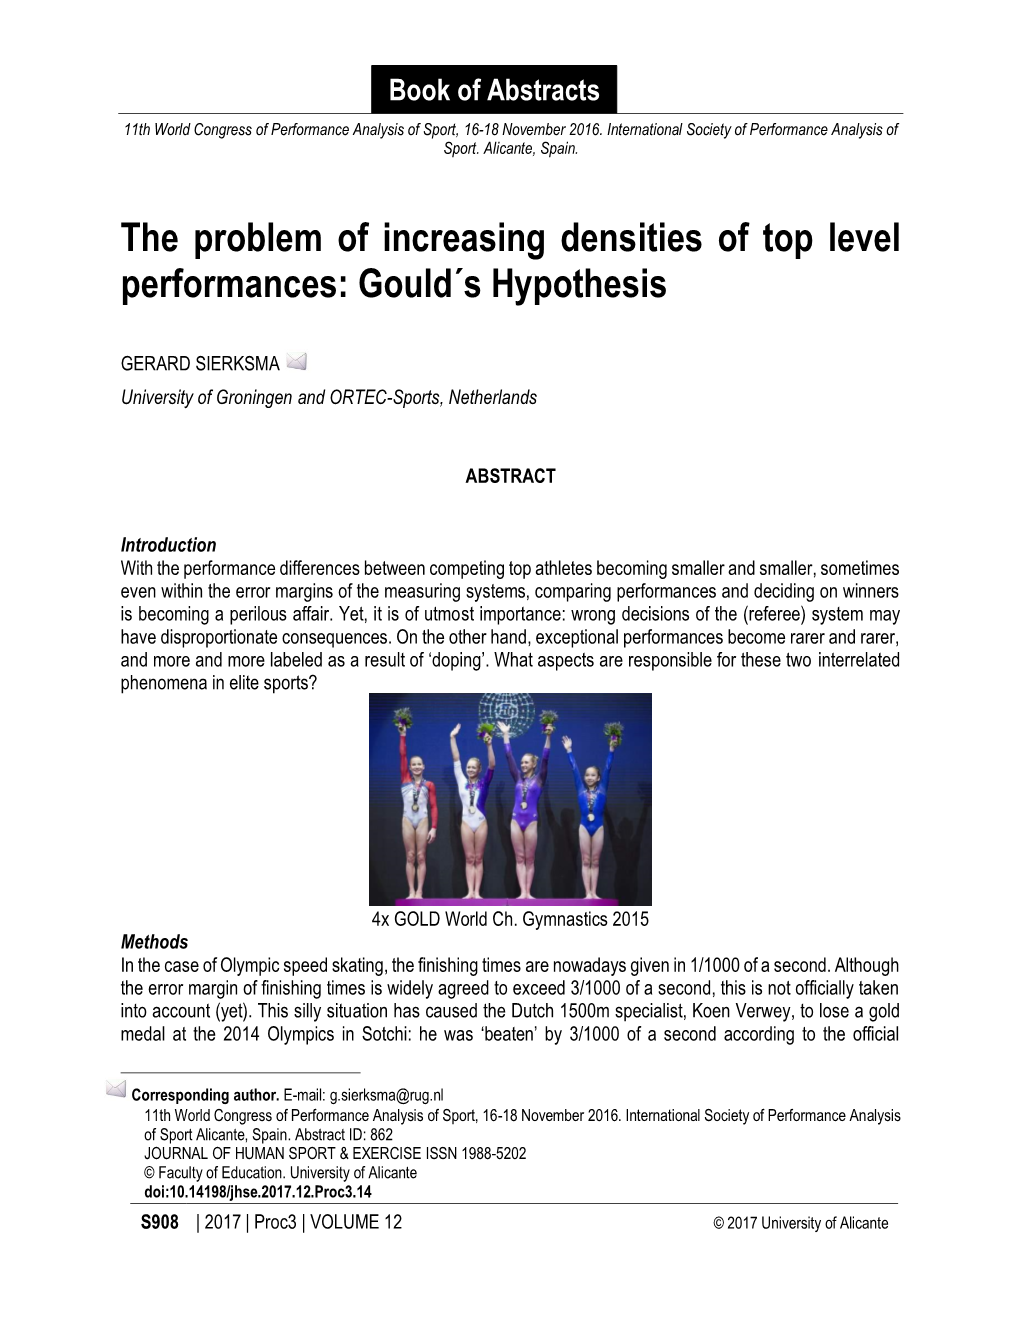 The Problem of Increasing Densities of Top Level Performances: Gould´S Hypothesis